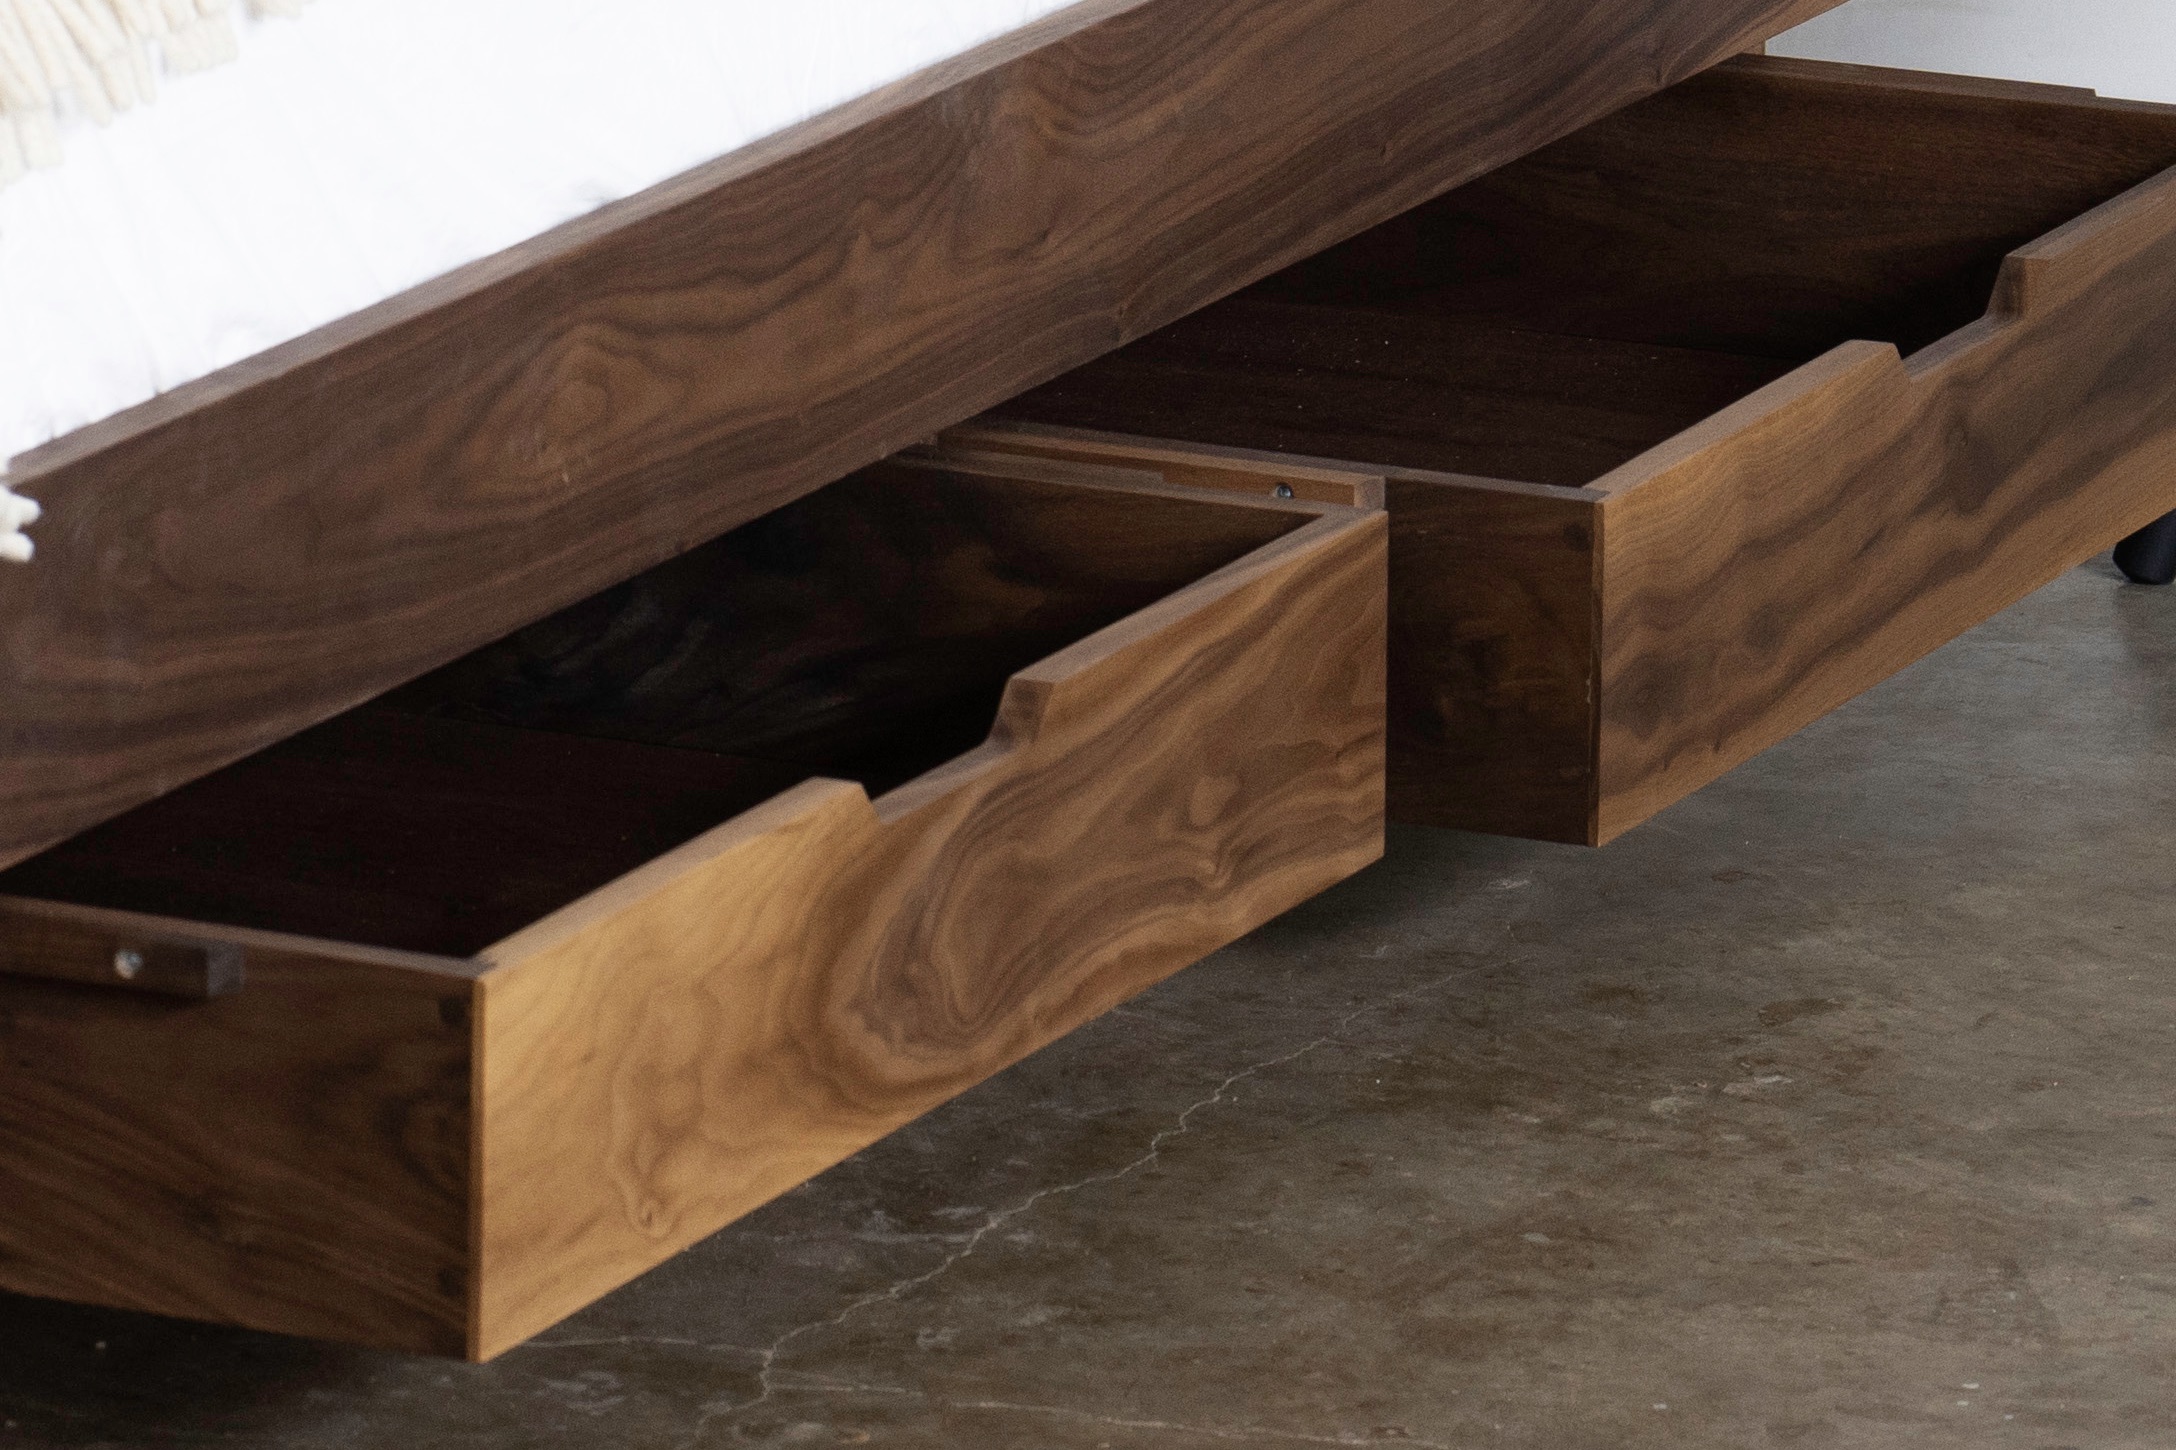 Two under-bed storage drawers with a notched cutout at the top of each. Made of walnut.